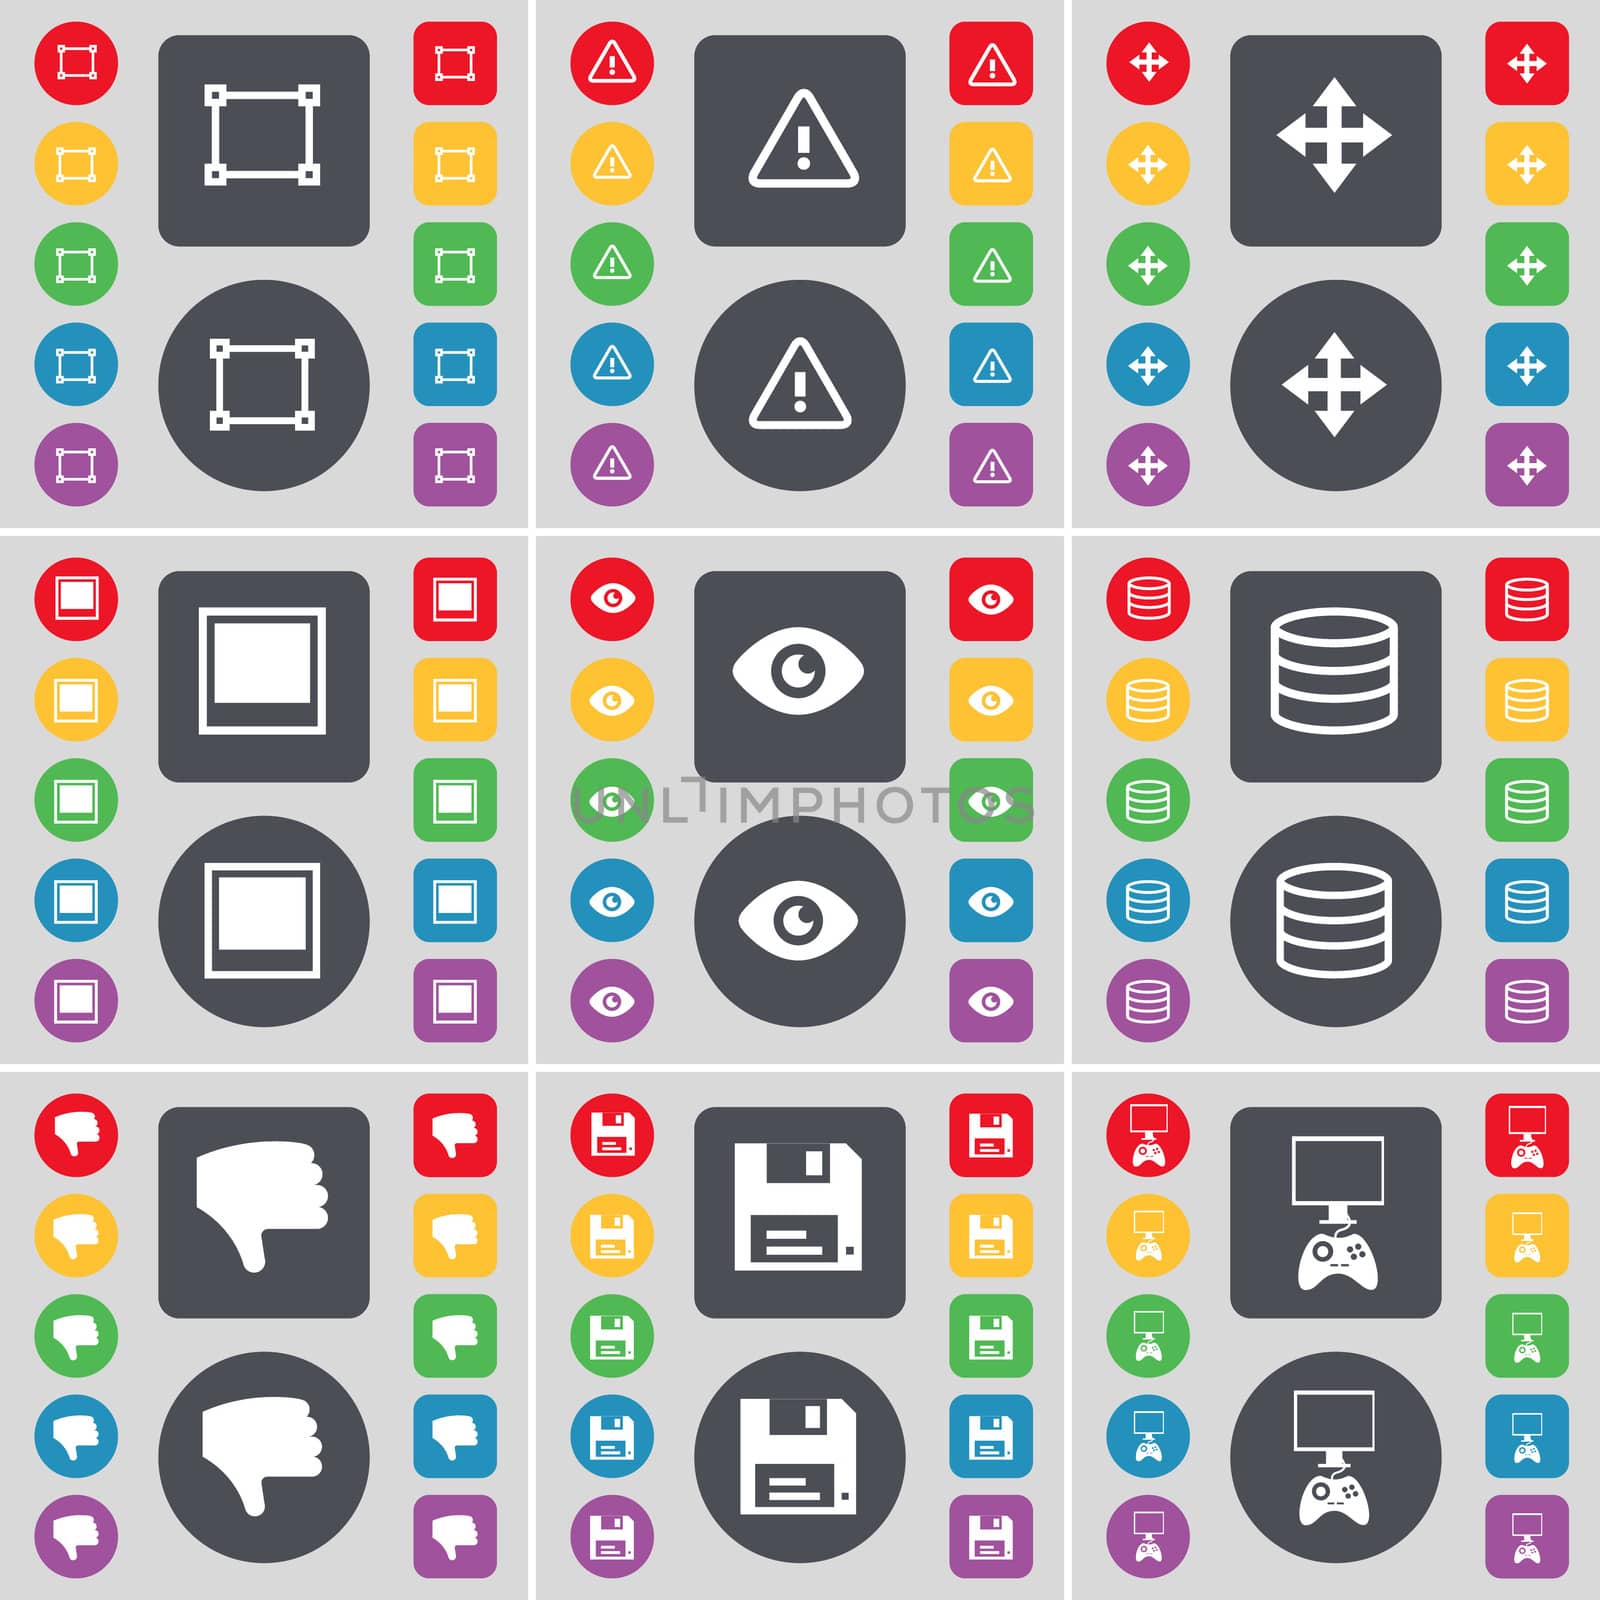 Frame, Warning, Moving, Window, Vision, Database, Dislike, Floppy disk, Monitor icon symbol. A large set of flat, colored buttons for your design. illustration